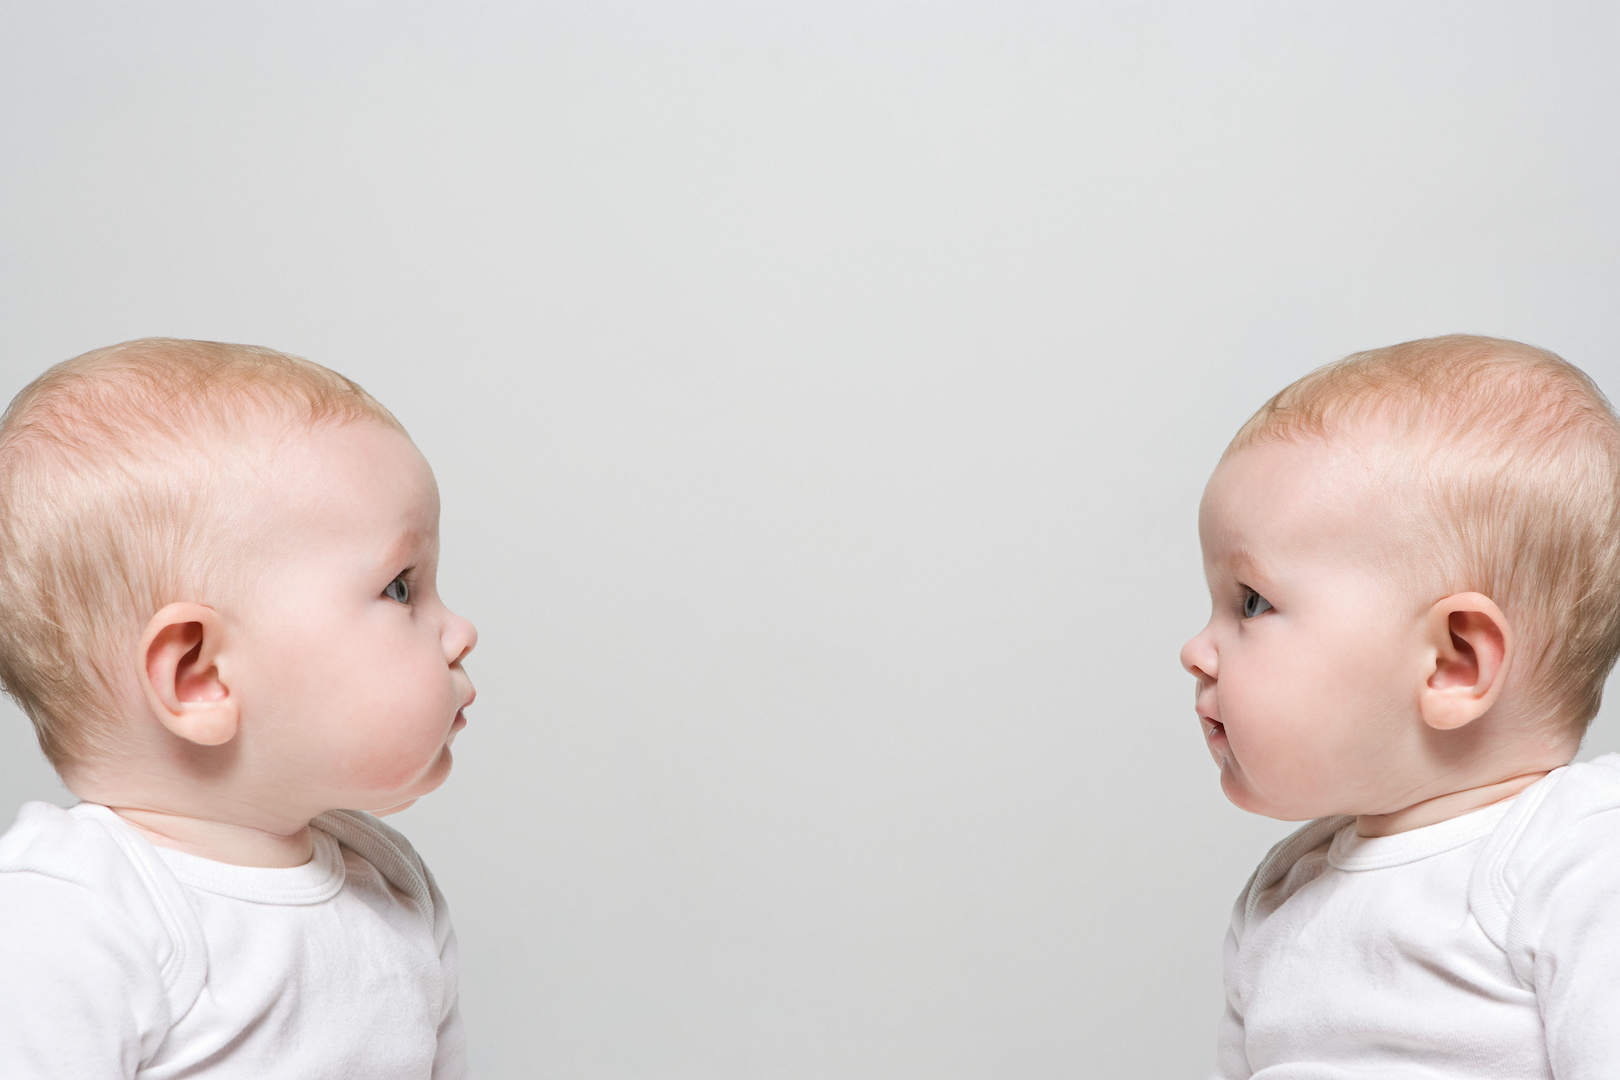 Profile view of two identical babies looking at one another.